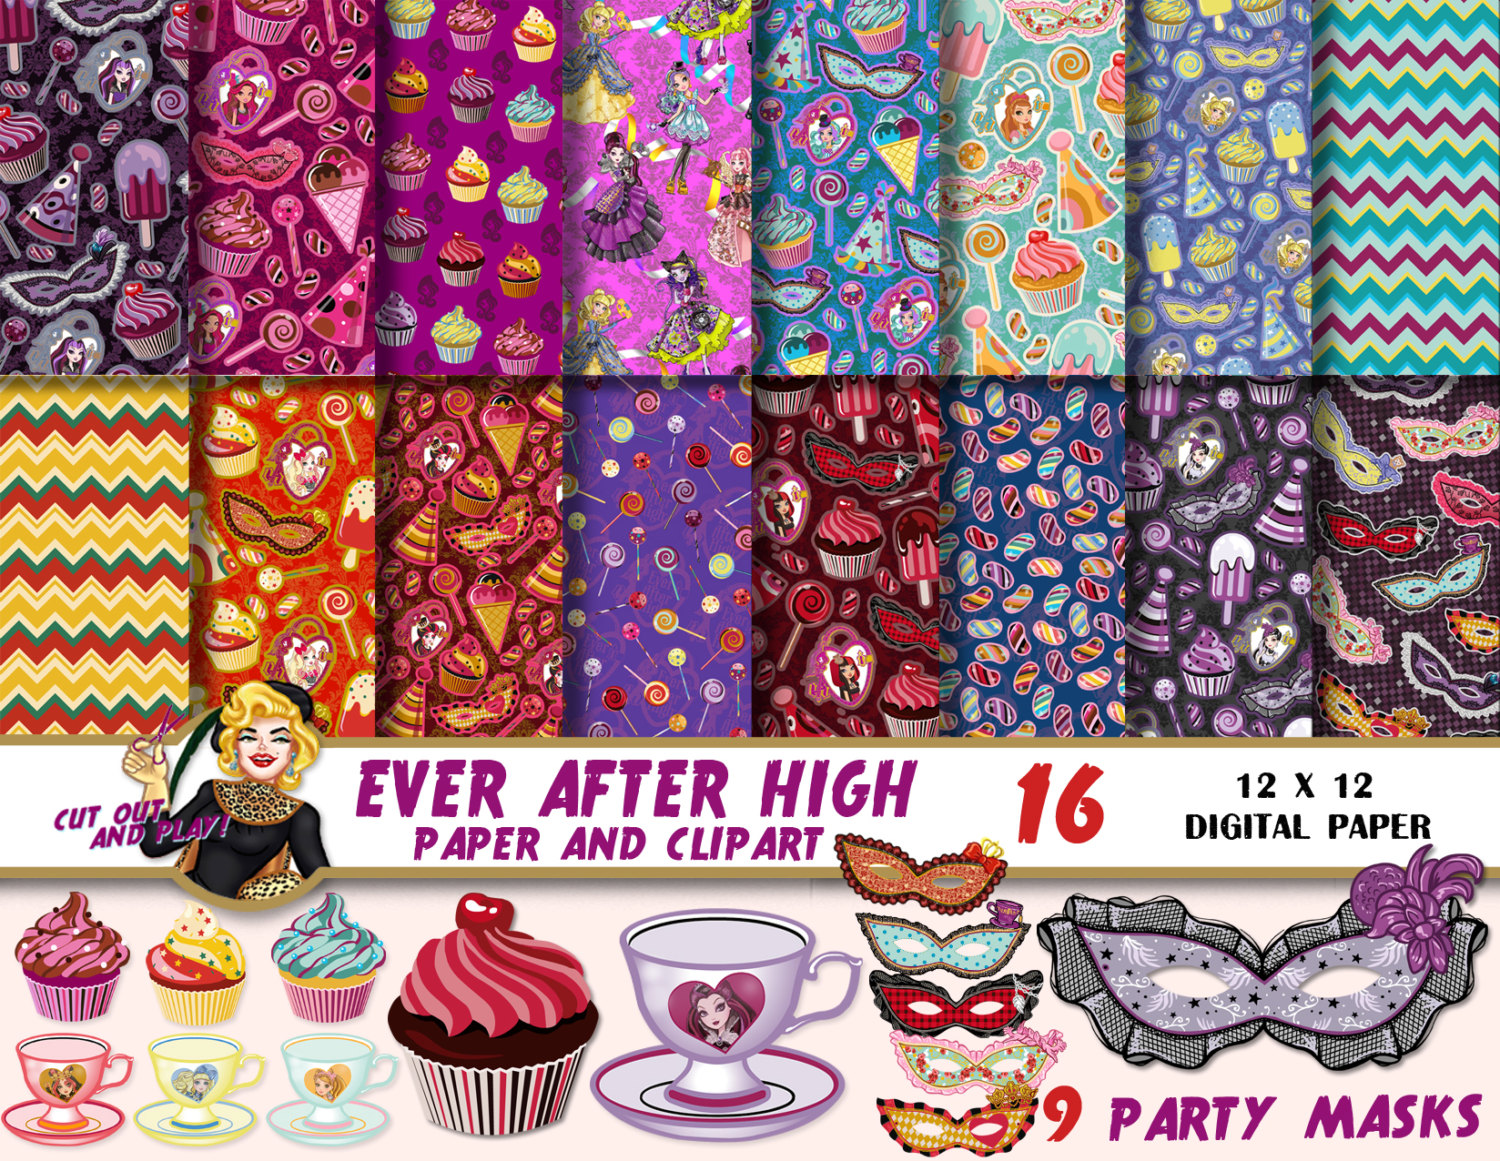 Purple clipart tea cups with bling 